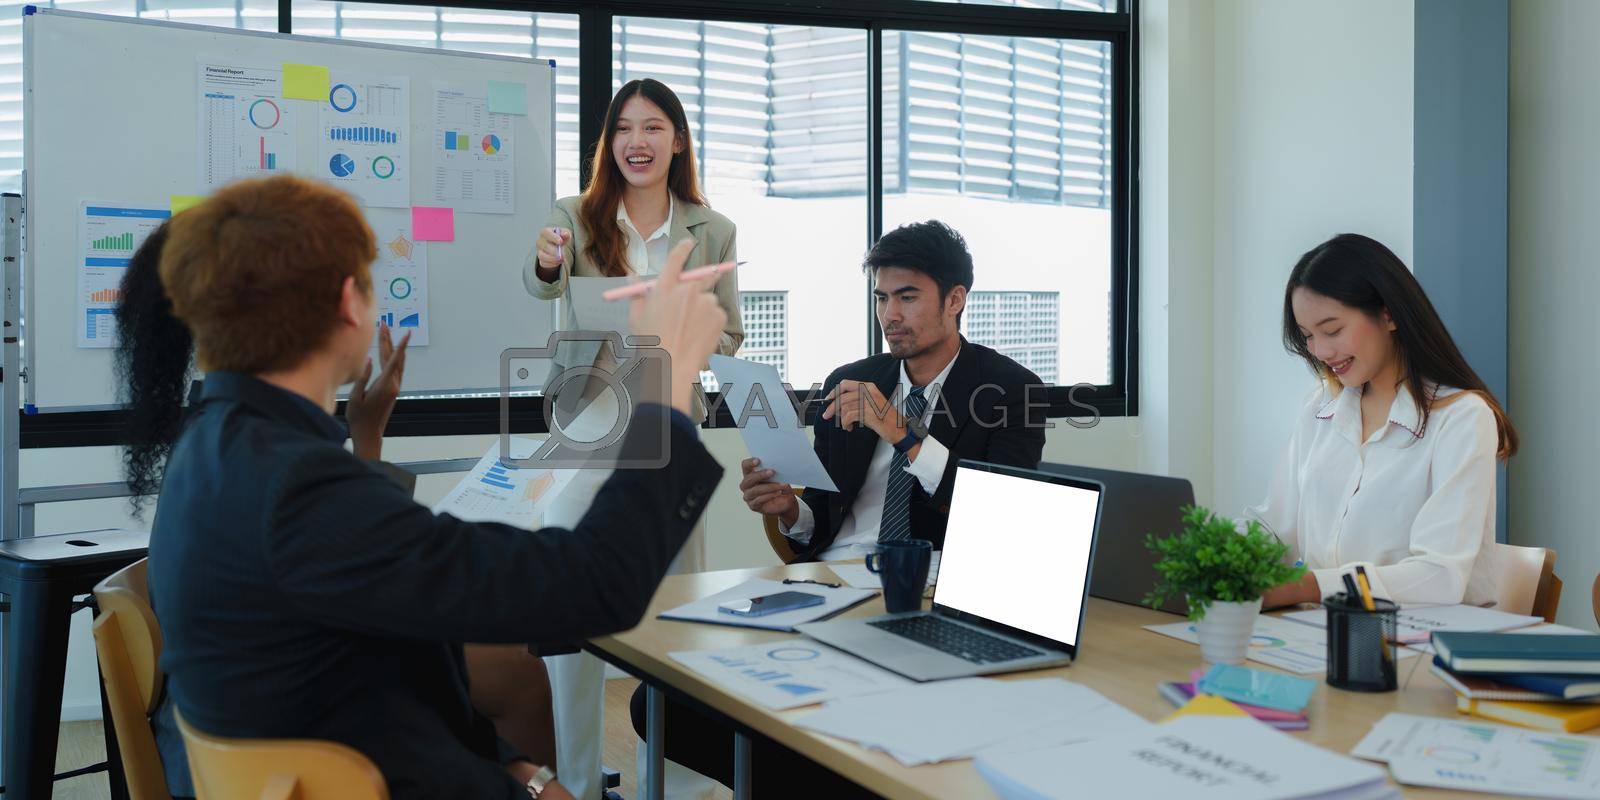 Royalty free image of Multicultural Business people meeting at board room to brainstorming strategy workshop business by itchaznong